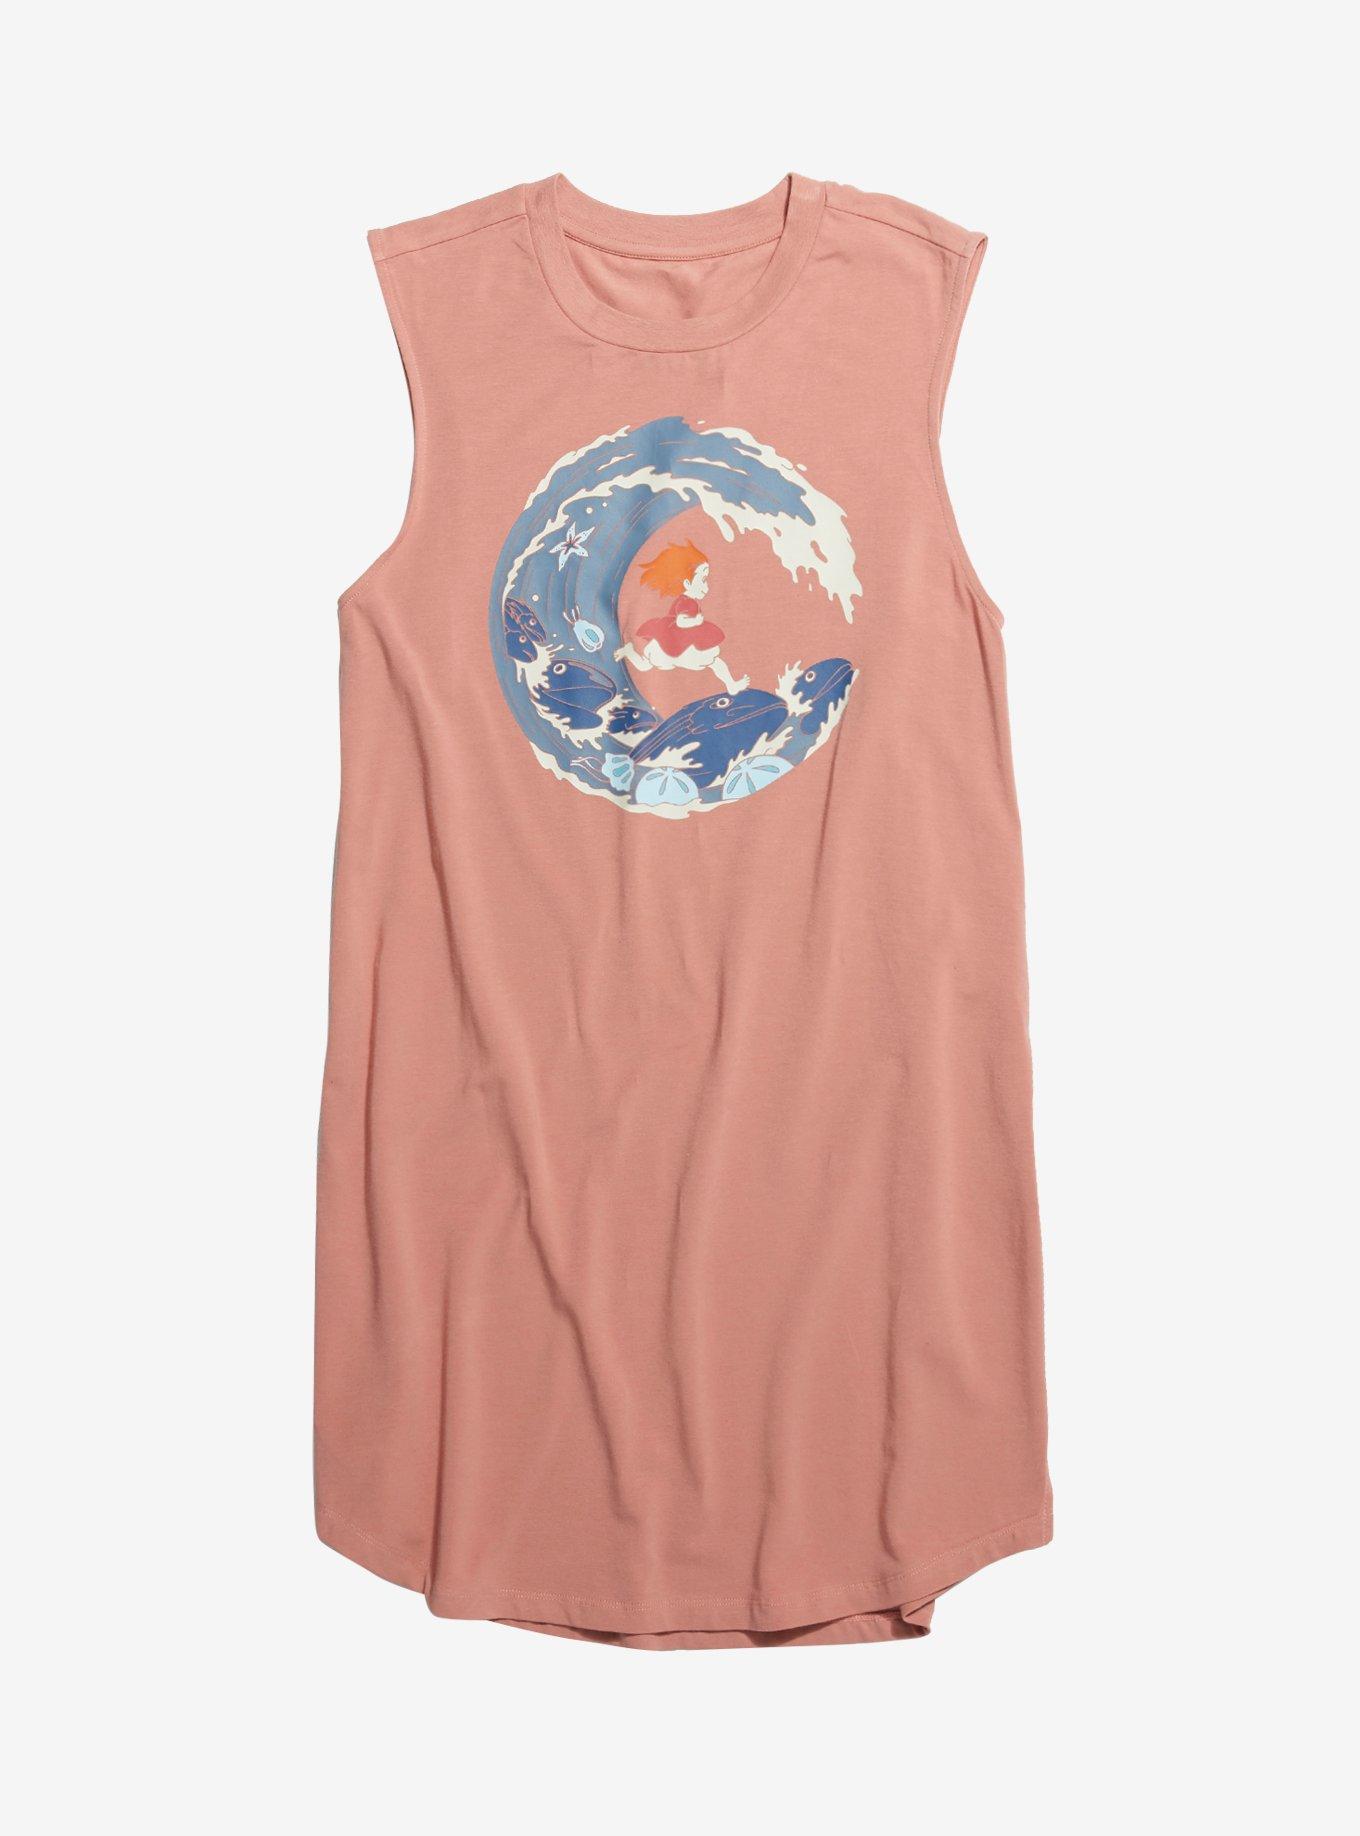 Her Universe Studio Ghibli Earth Day Collection Ponyo Wave Walker Girls Tank Dress Plus Size, CORAL, hi-res